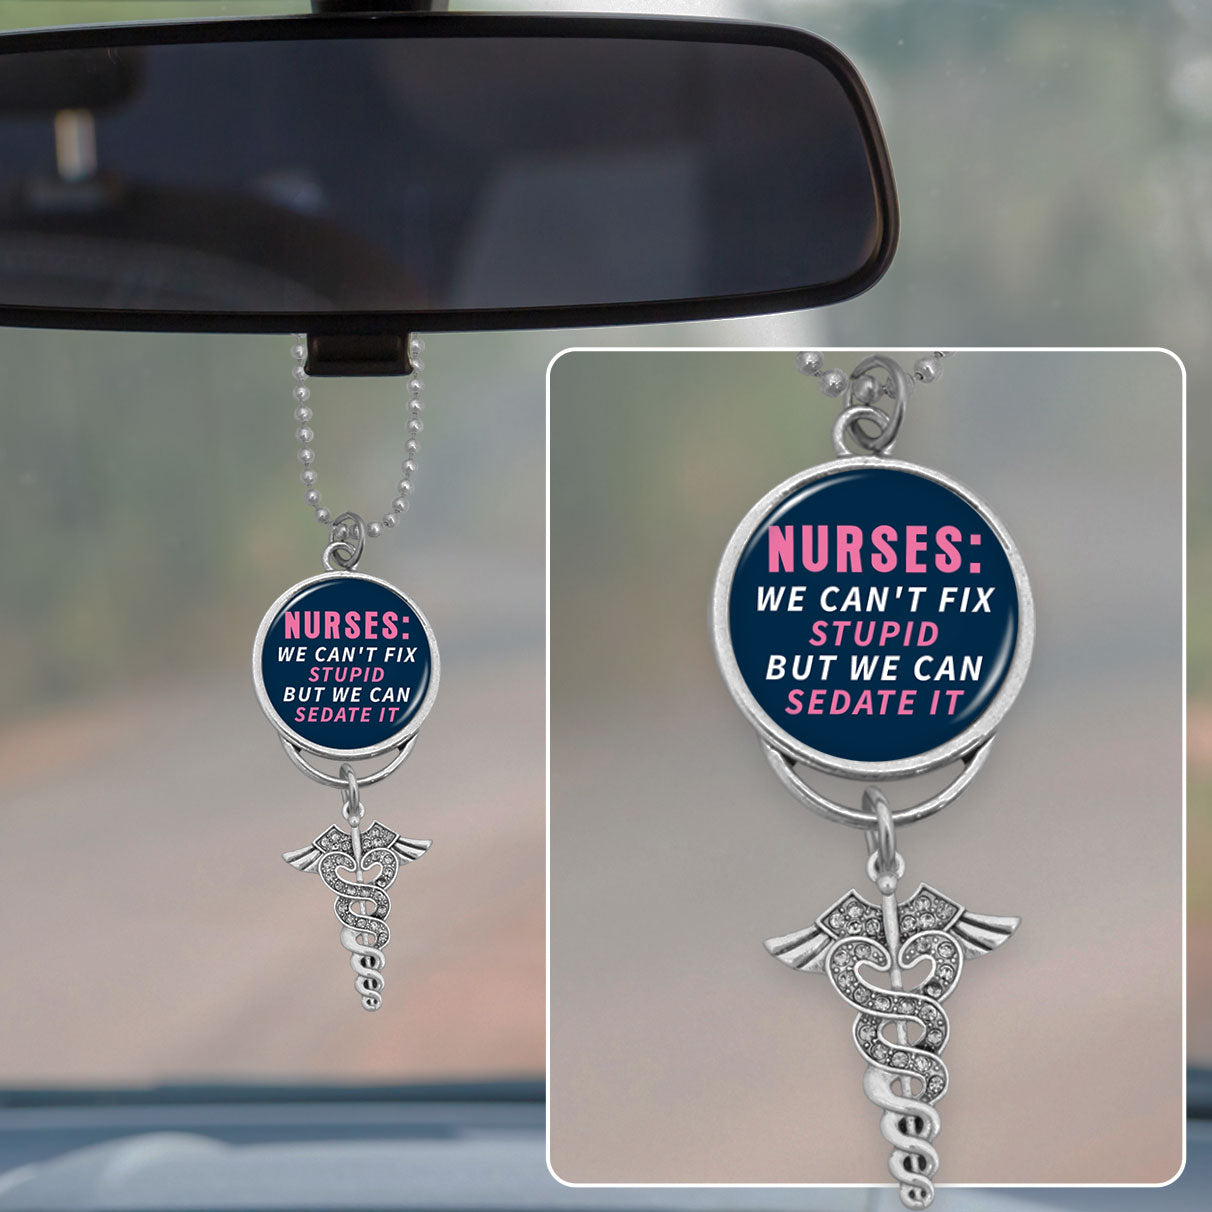 Nurses Can't Fix Stupid But Can Sedate It Rearview Mirror Charm